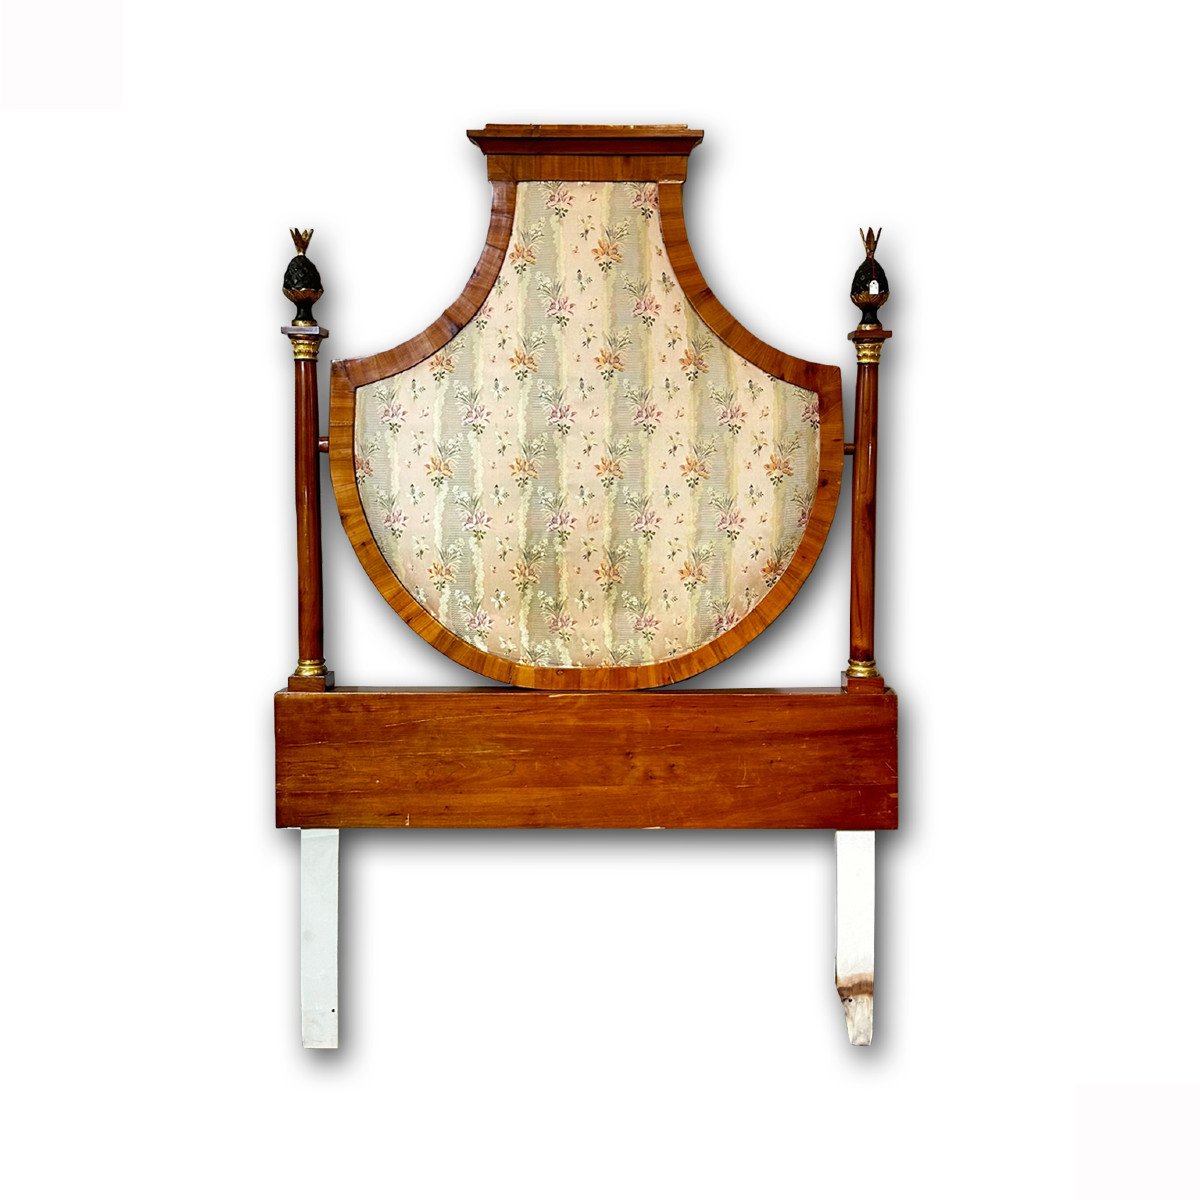 Early 19th Century Empire Period Bed Headboard